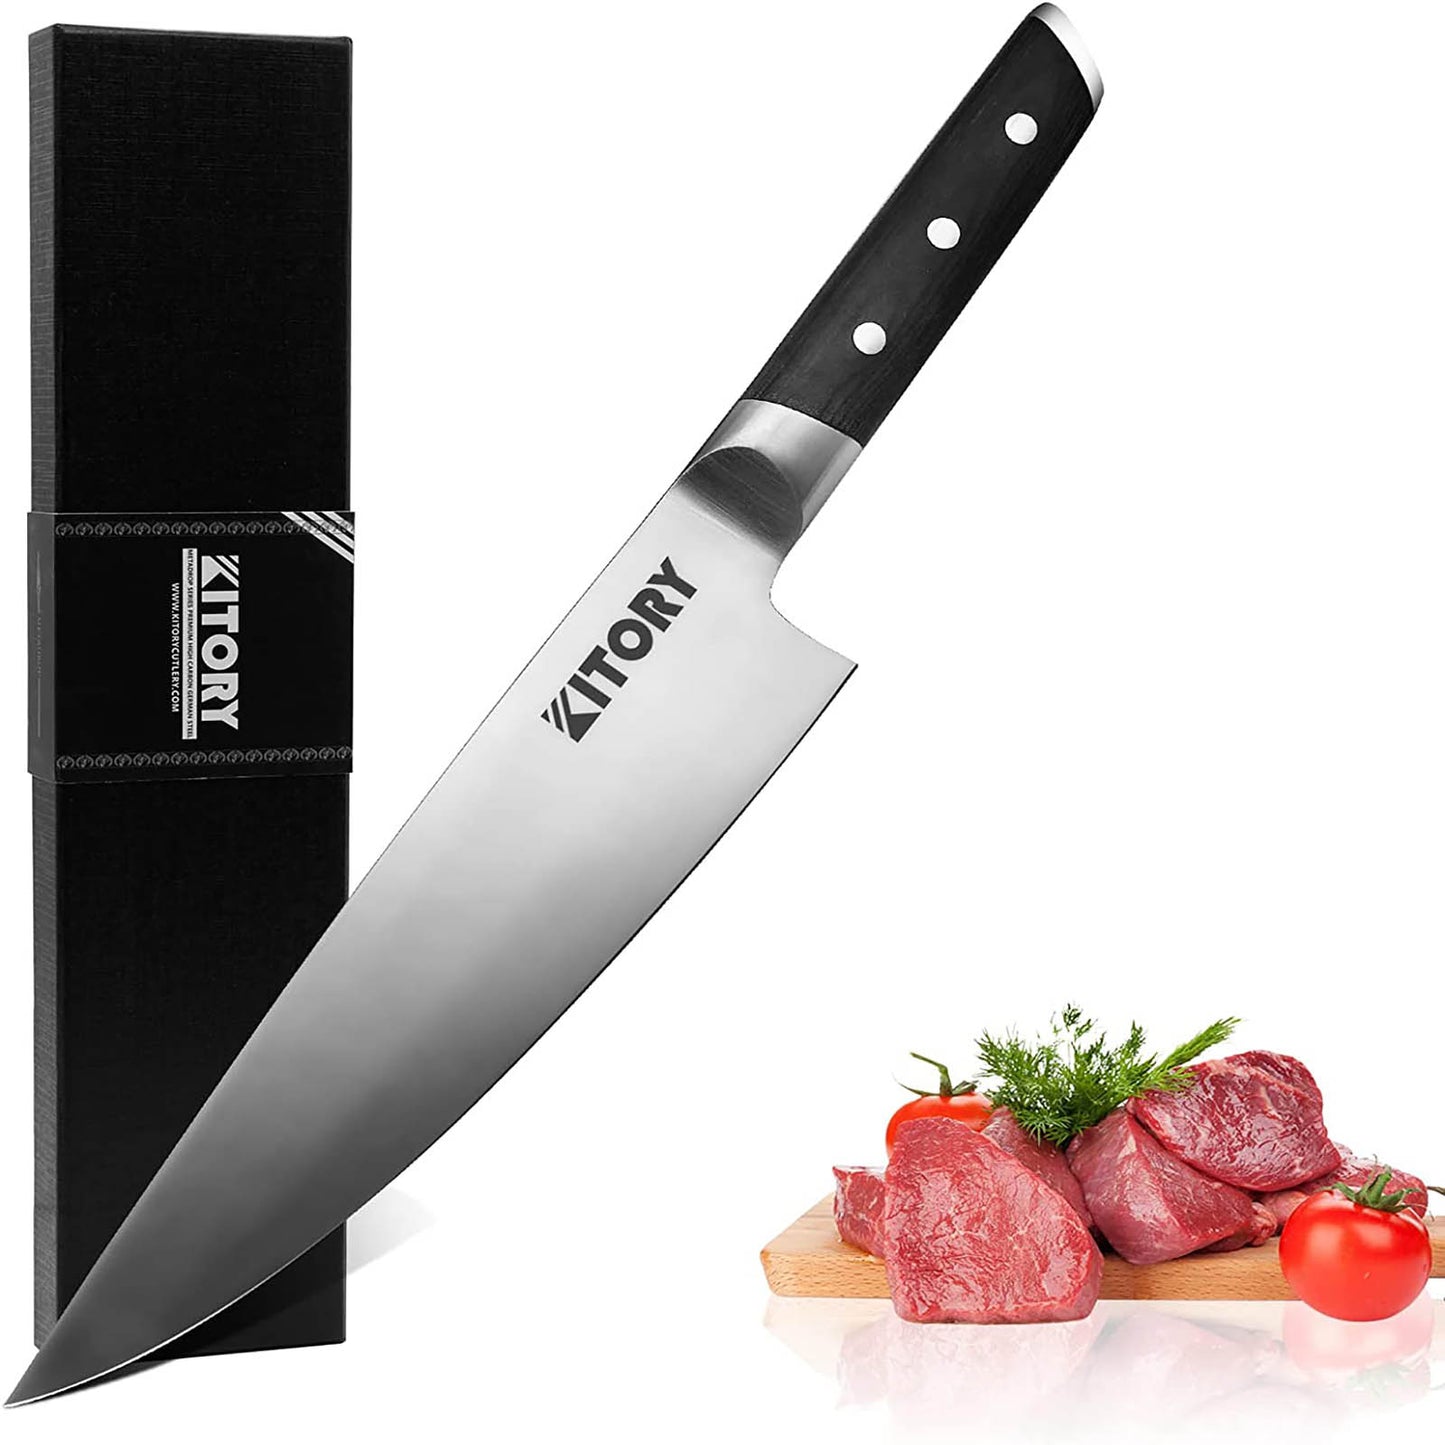 HALOYIVGO 8 inch Chef Knife, Hand Forged Professional Chef's Knife with Pakkawood Handle, AUS-8 High Carbon Stainless Steel, Kitchen Meat Vegetable